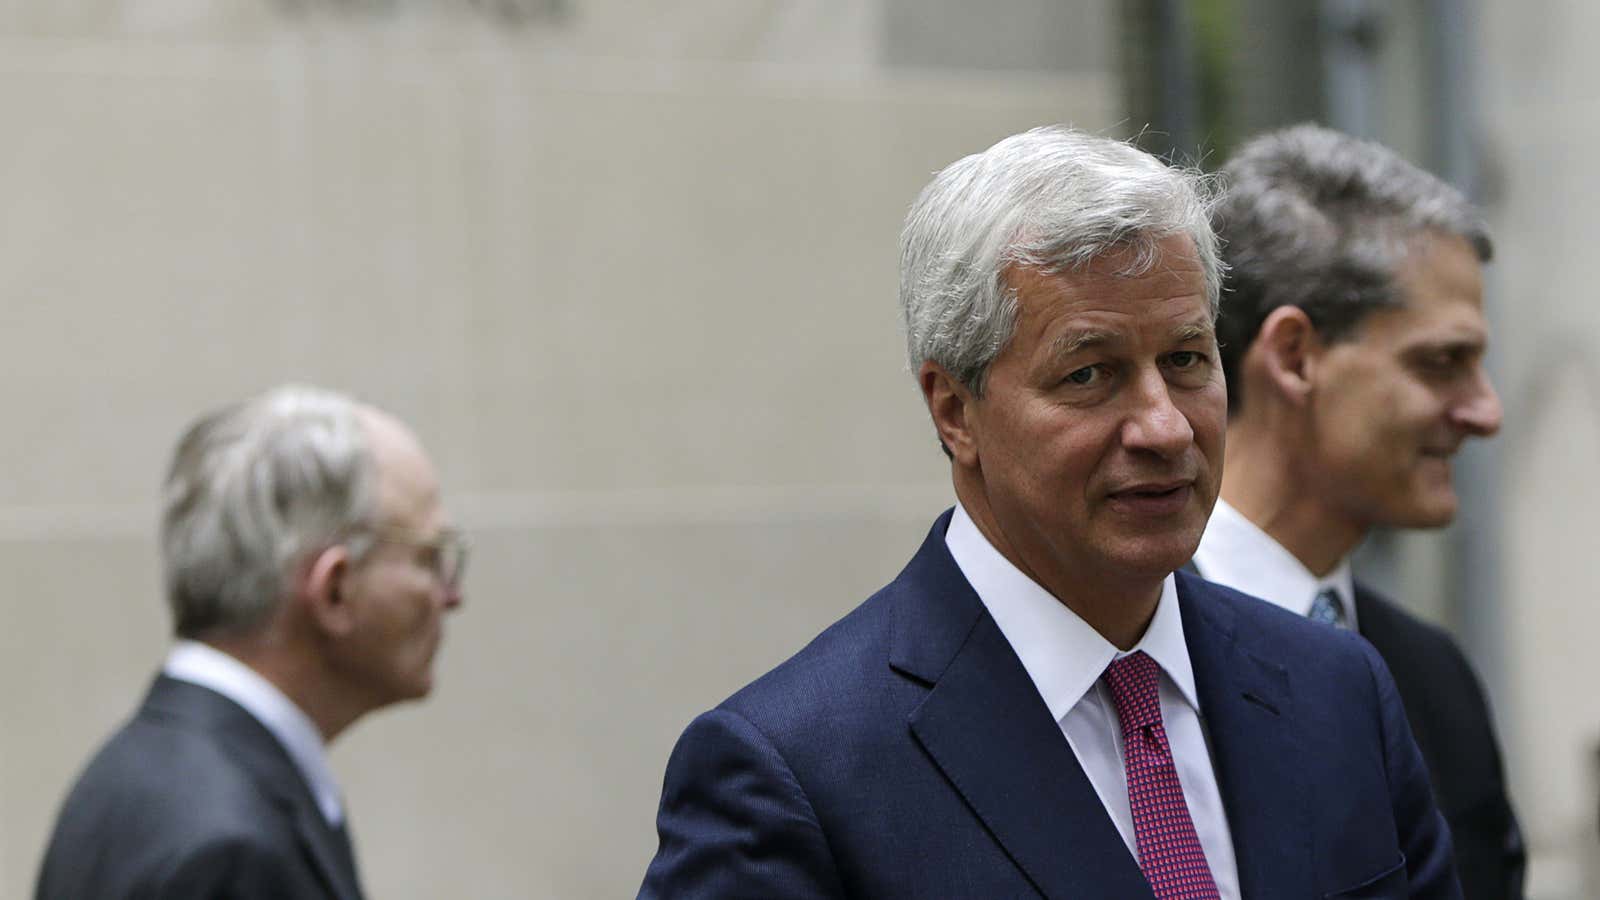 For Jamie Dimon, the Department of Justice looms large.